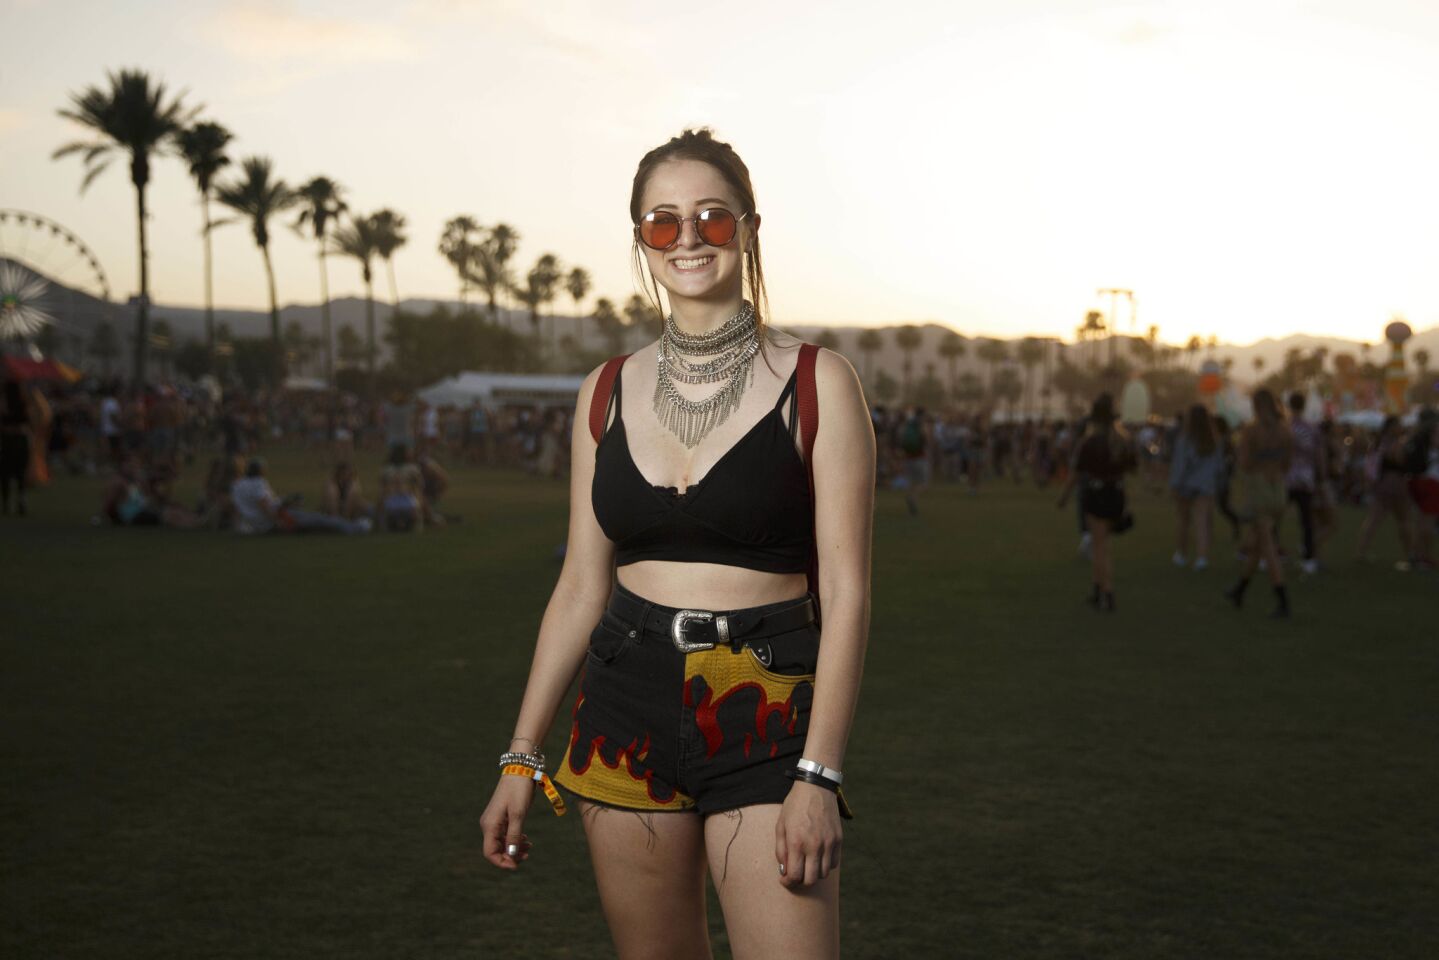 Sophia Arbess, 18, of New York, drew inspiration from everywhere with an old western-style belt buckle, huge '70s-inspired shade, a glamorous chandelier necklace and fire-printed shorts that call to mind the race track, as she poses for a portrait during weekend one of the three-day Coachella Valley Music and Arts Festival at the Empire Polo Grounds on Saturday, April 15, 2017 in Indio, Calif. (Patrick T. Fallon/ For The Los Angeles Times)